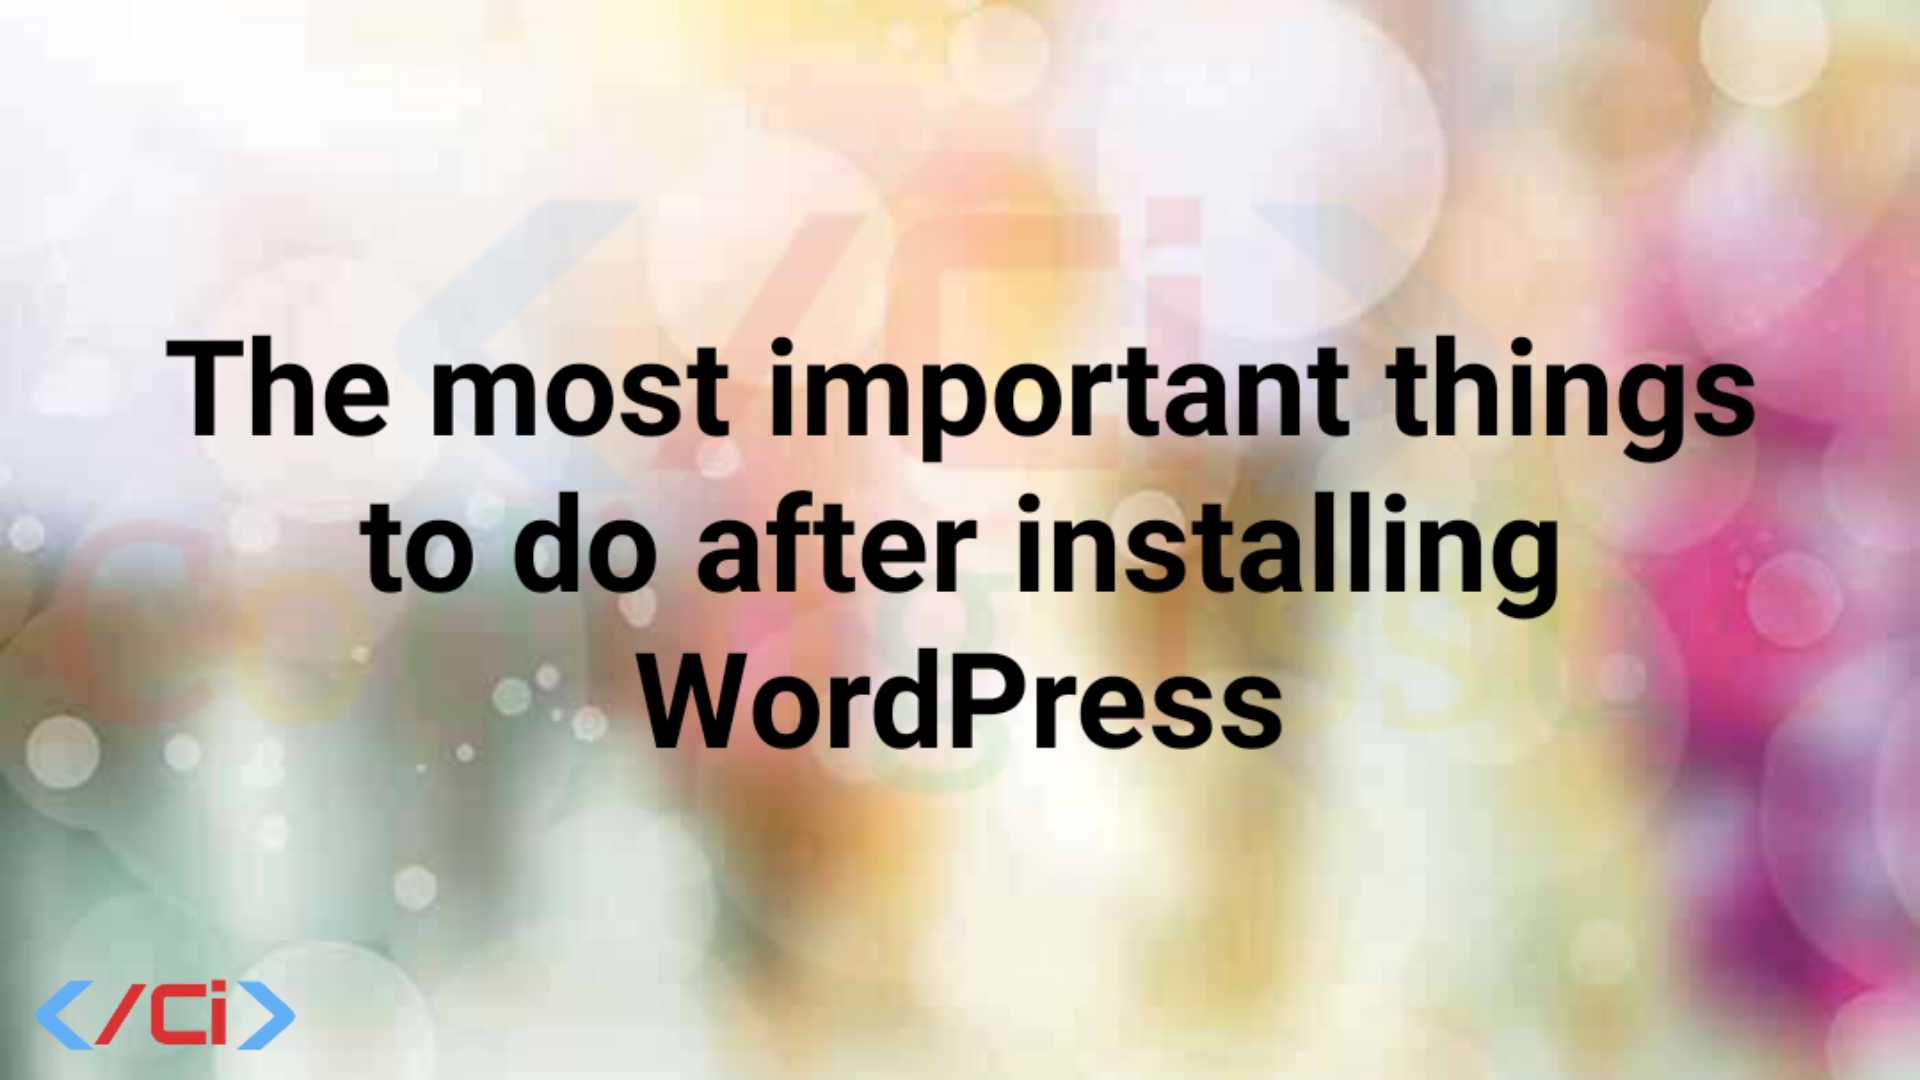 The most important things to do after installing WordPress